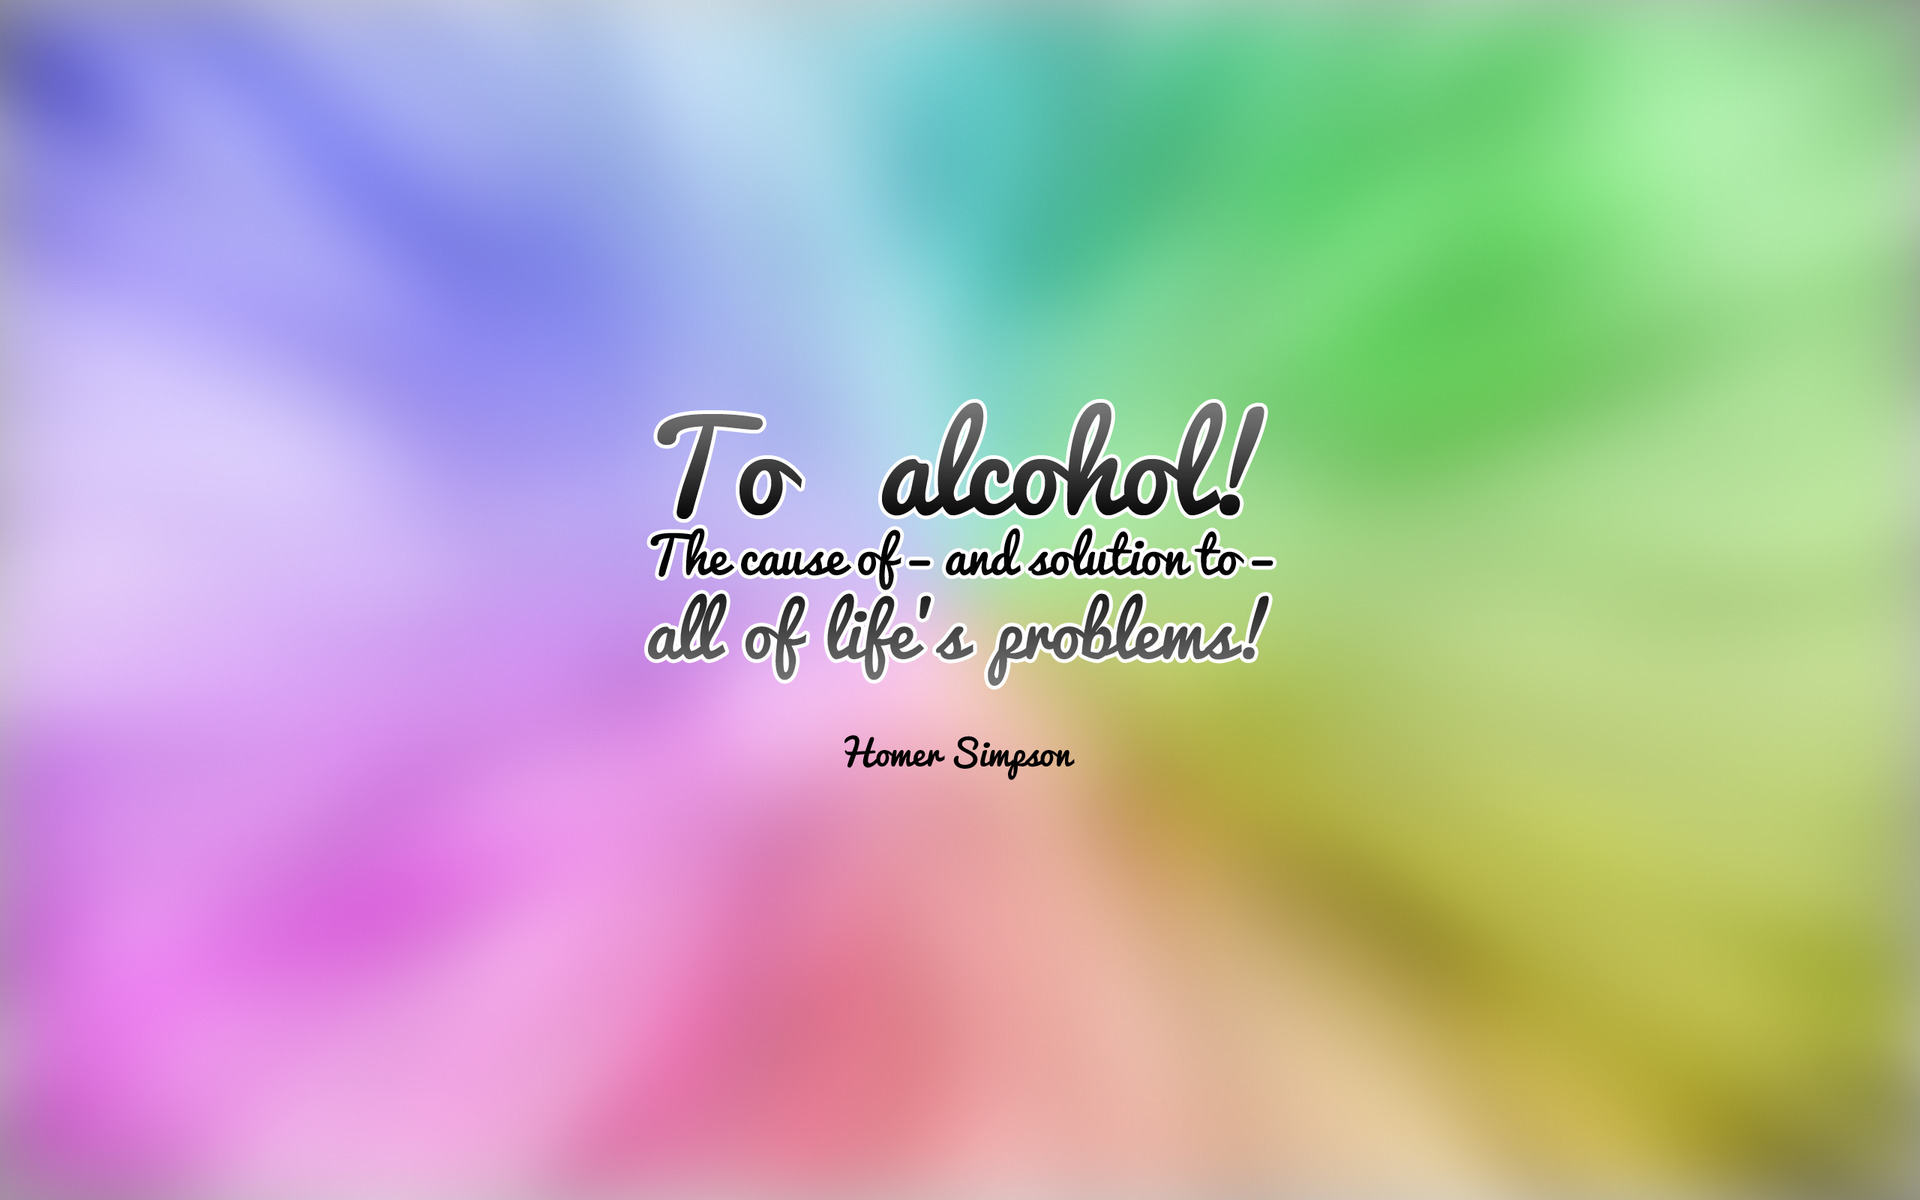 Quotes to stop drinking alcoholic Prayer for